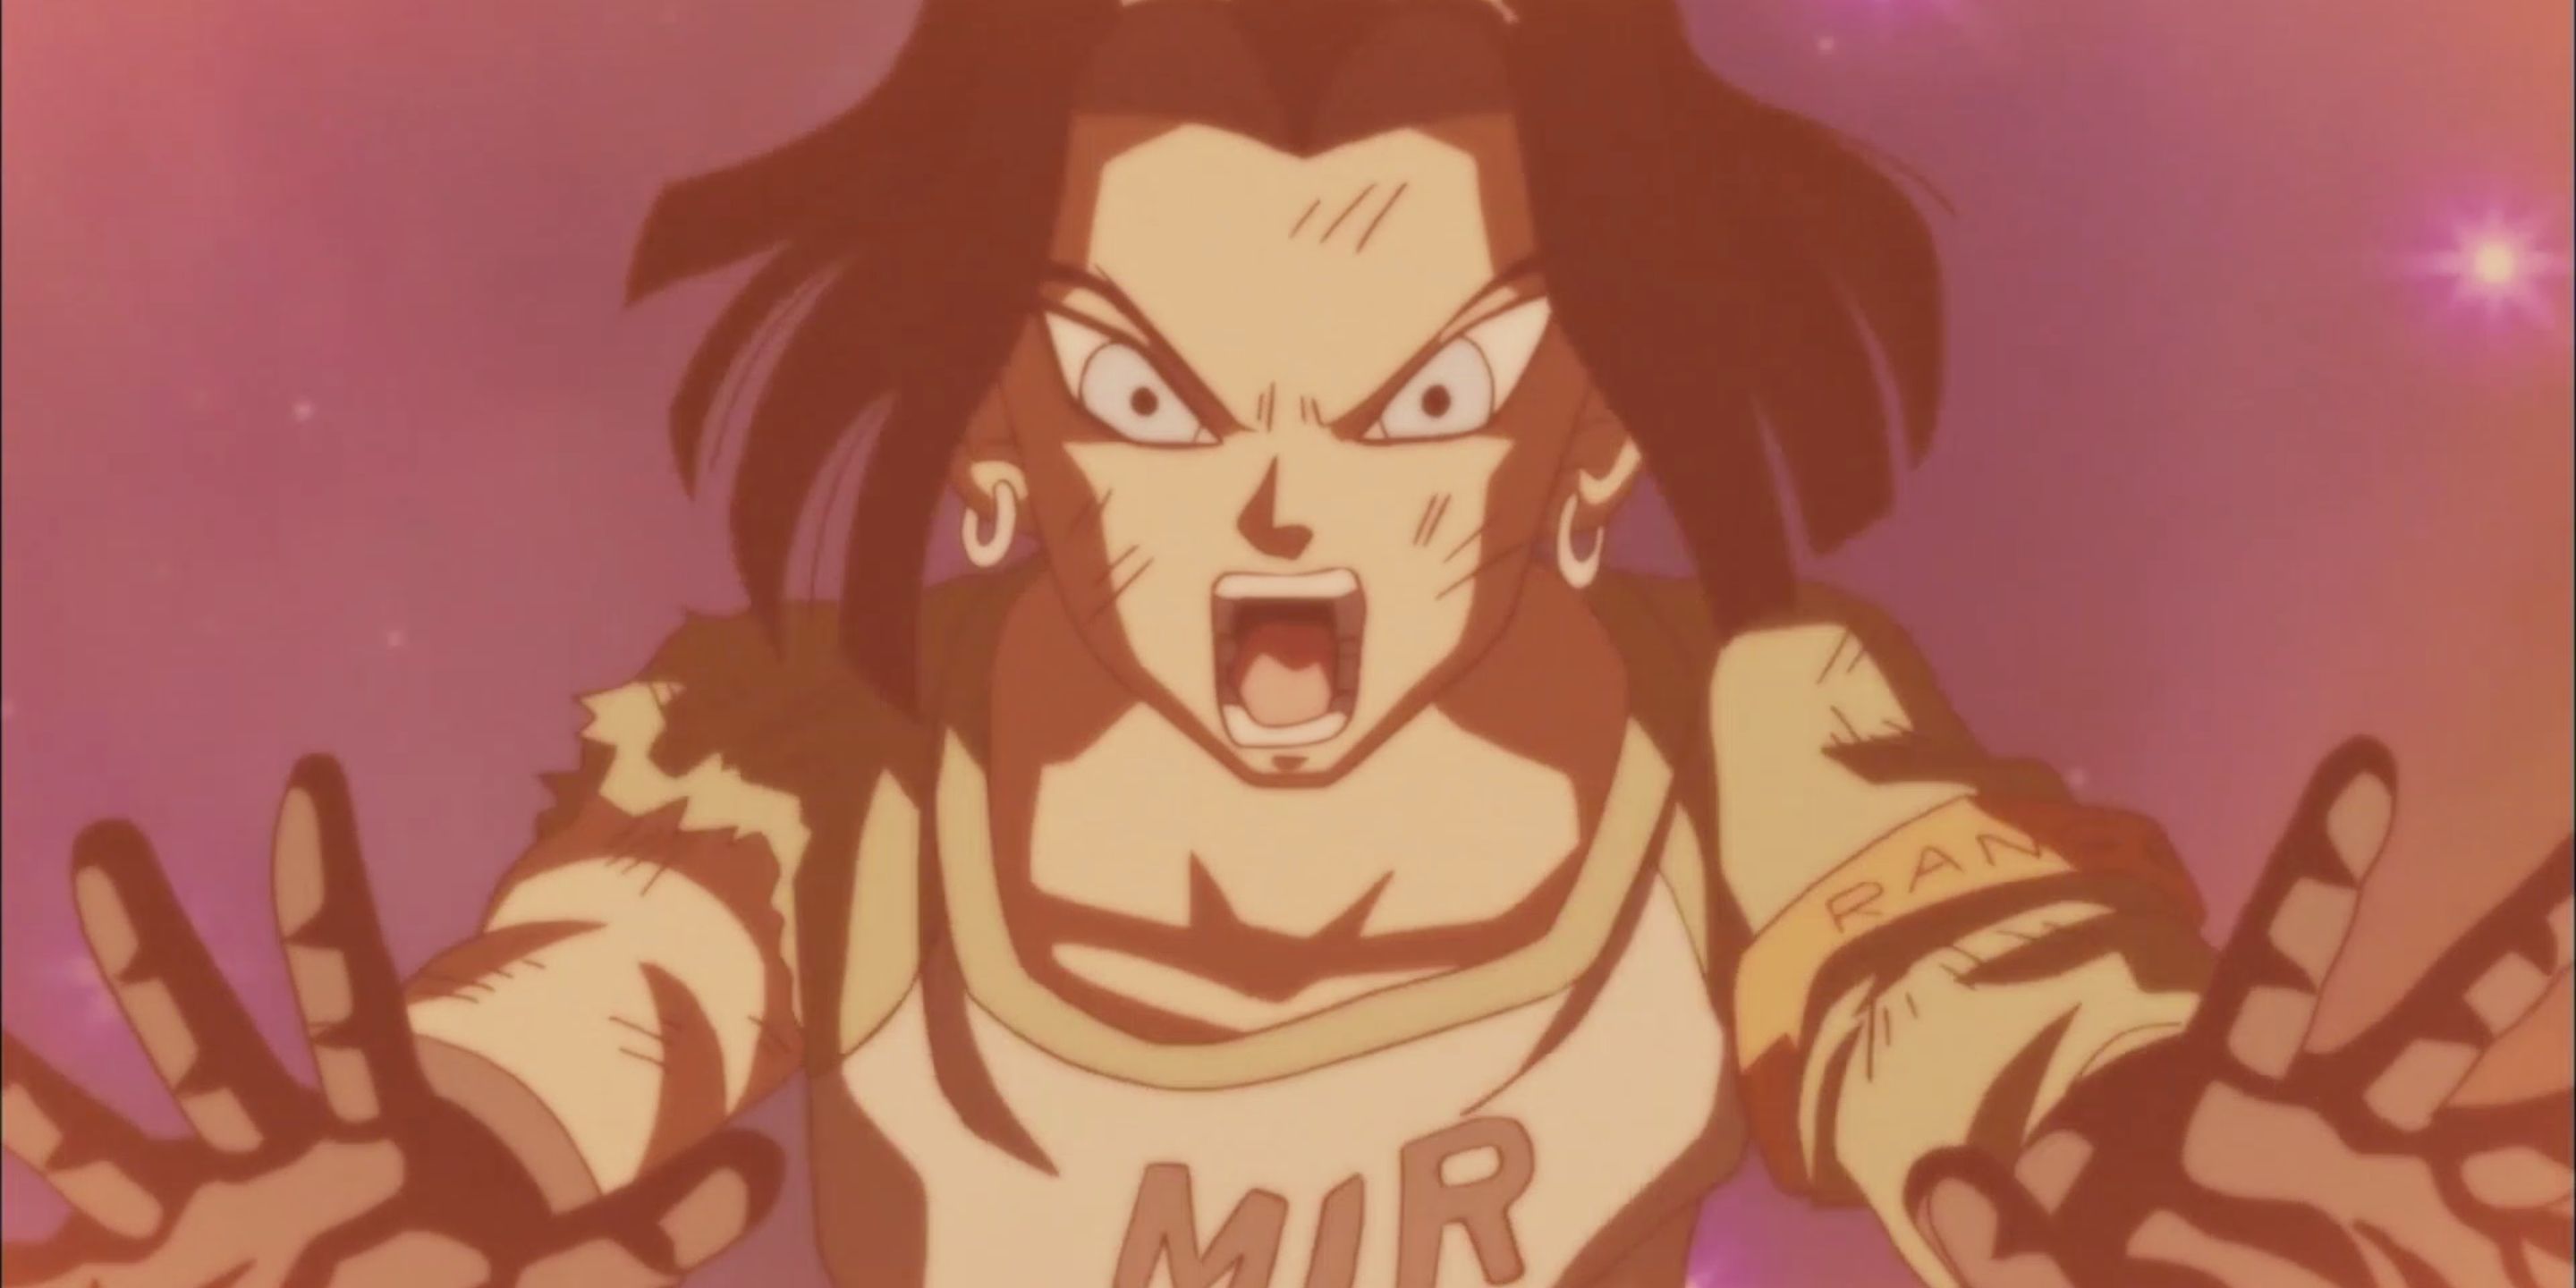 Android 17 yells and releases an energy attack during the Tournament of Power